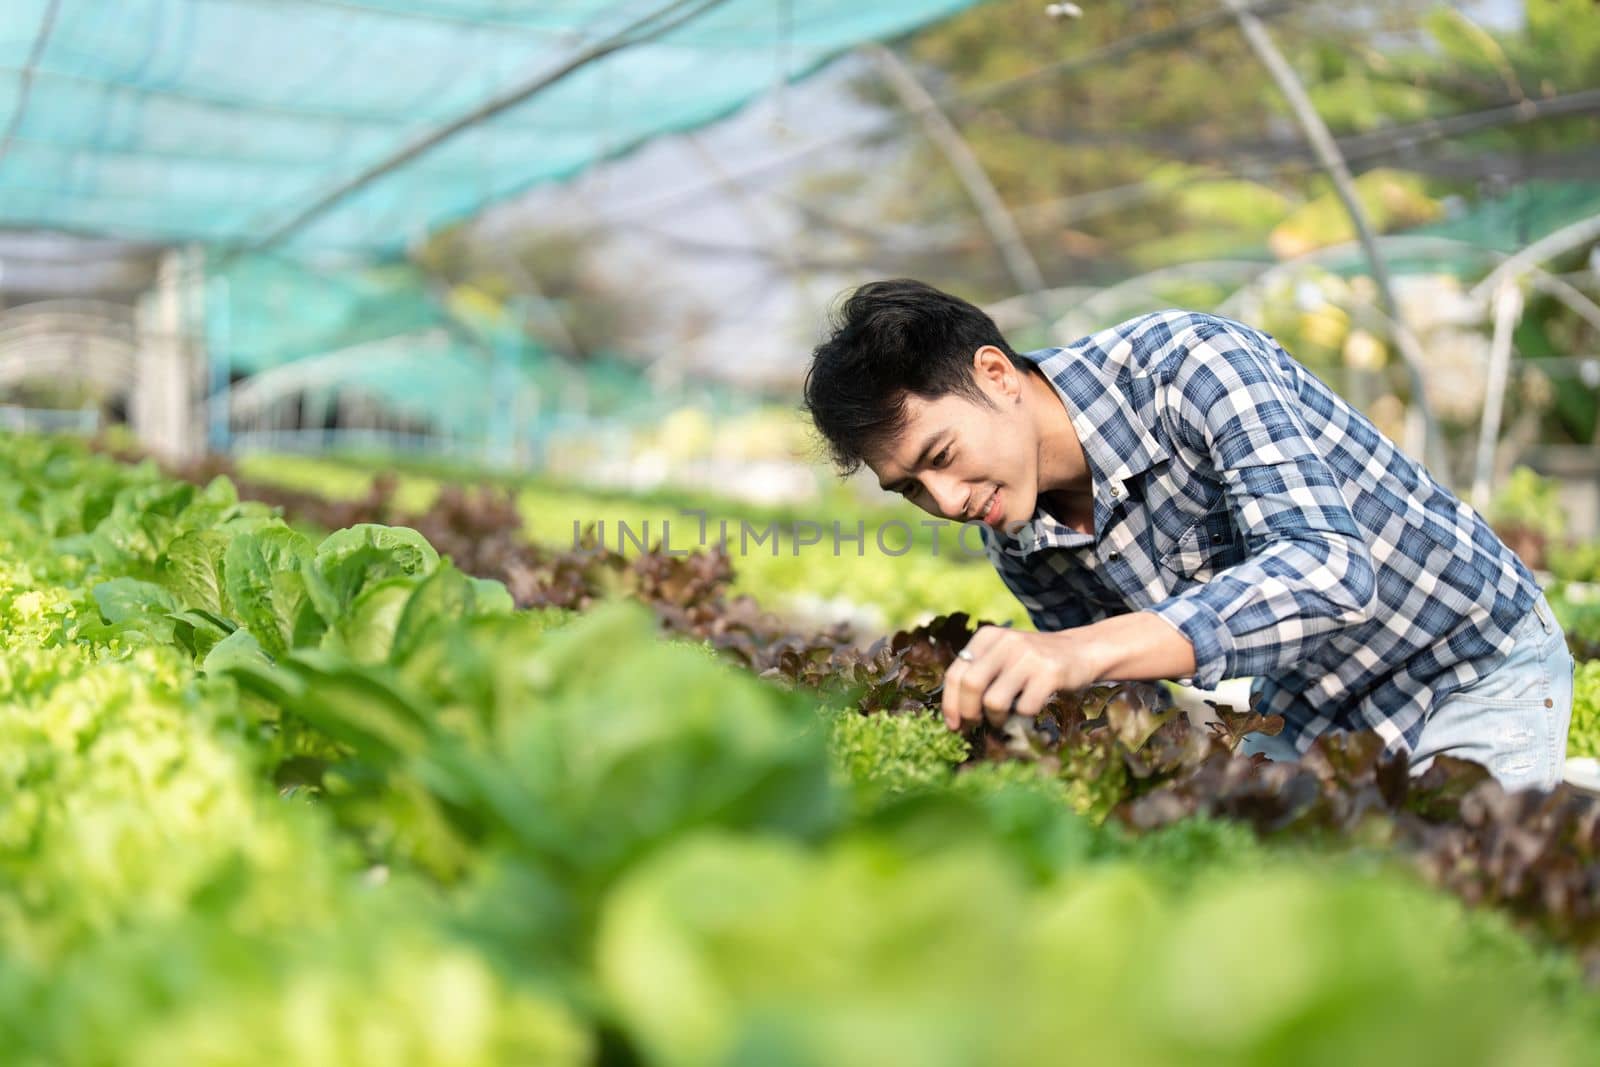 Happy male gardener smiling inspects quality of green oak vegetable in greenhouse garden. Young asian farmer cultivate healthy nutrition organic salad vegetables in hydroponic farming.